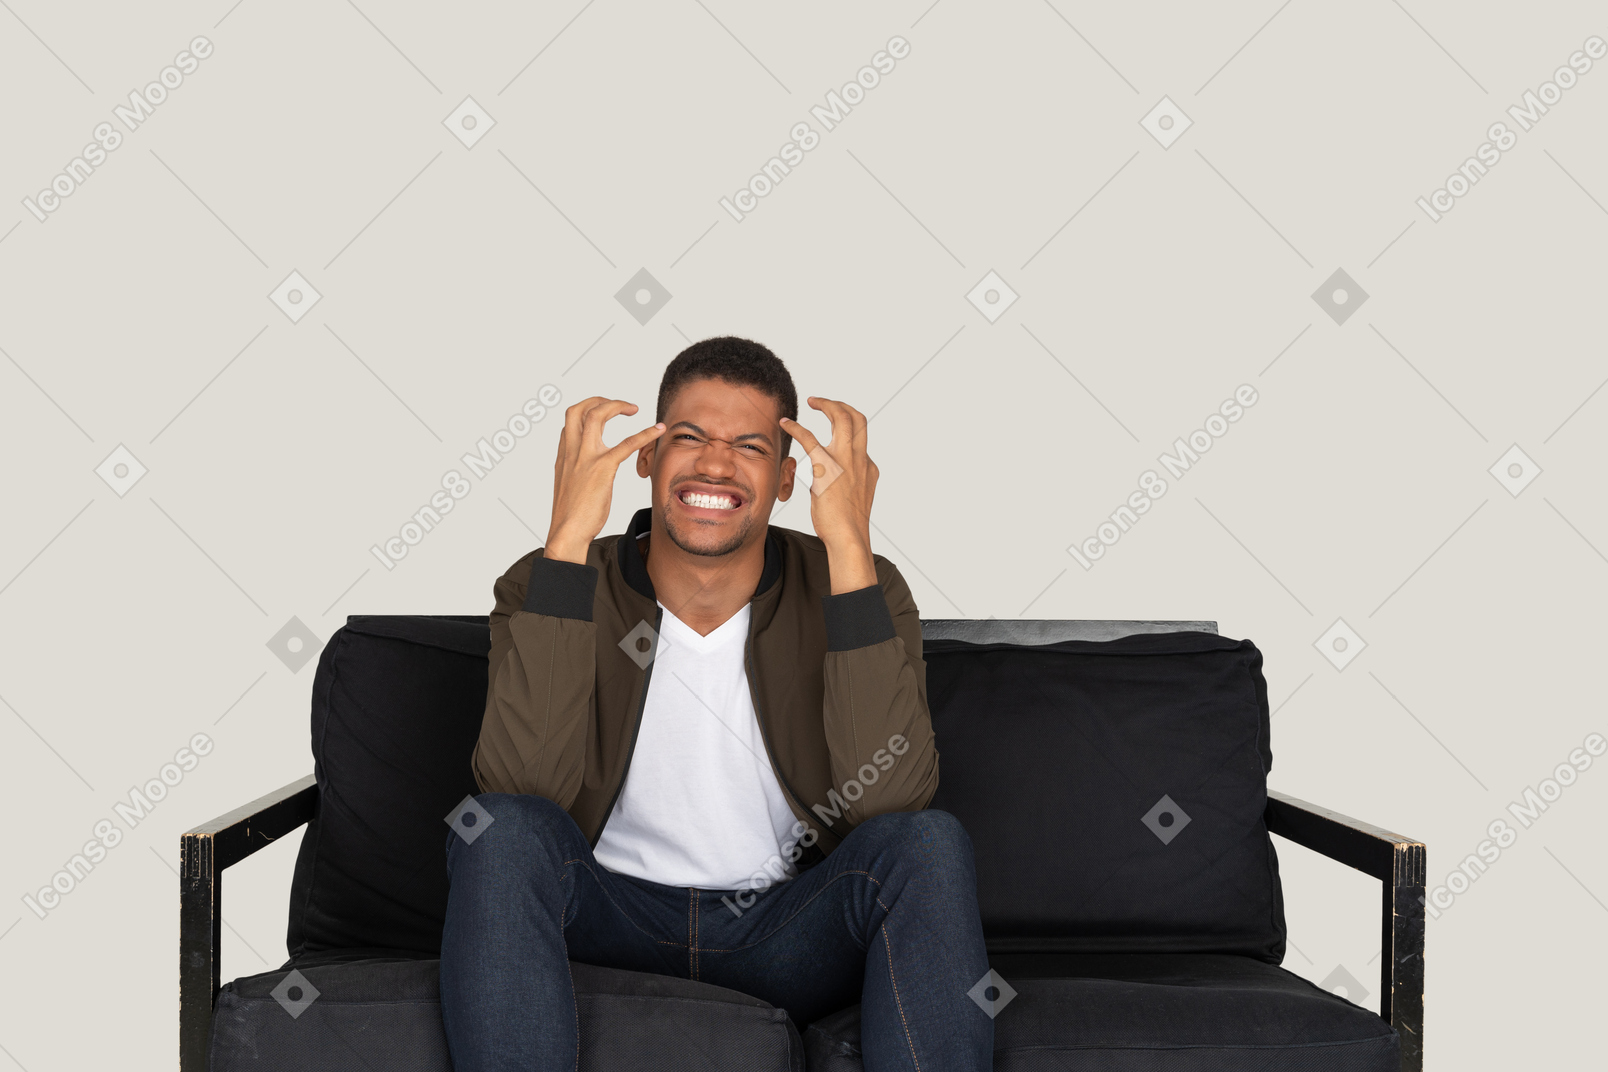 Mad looking young man sitting on the sofa and touching his head with hands